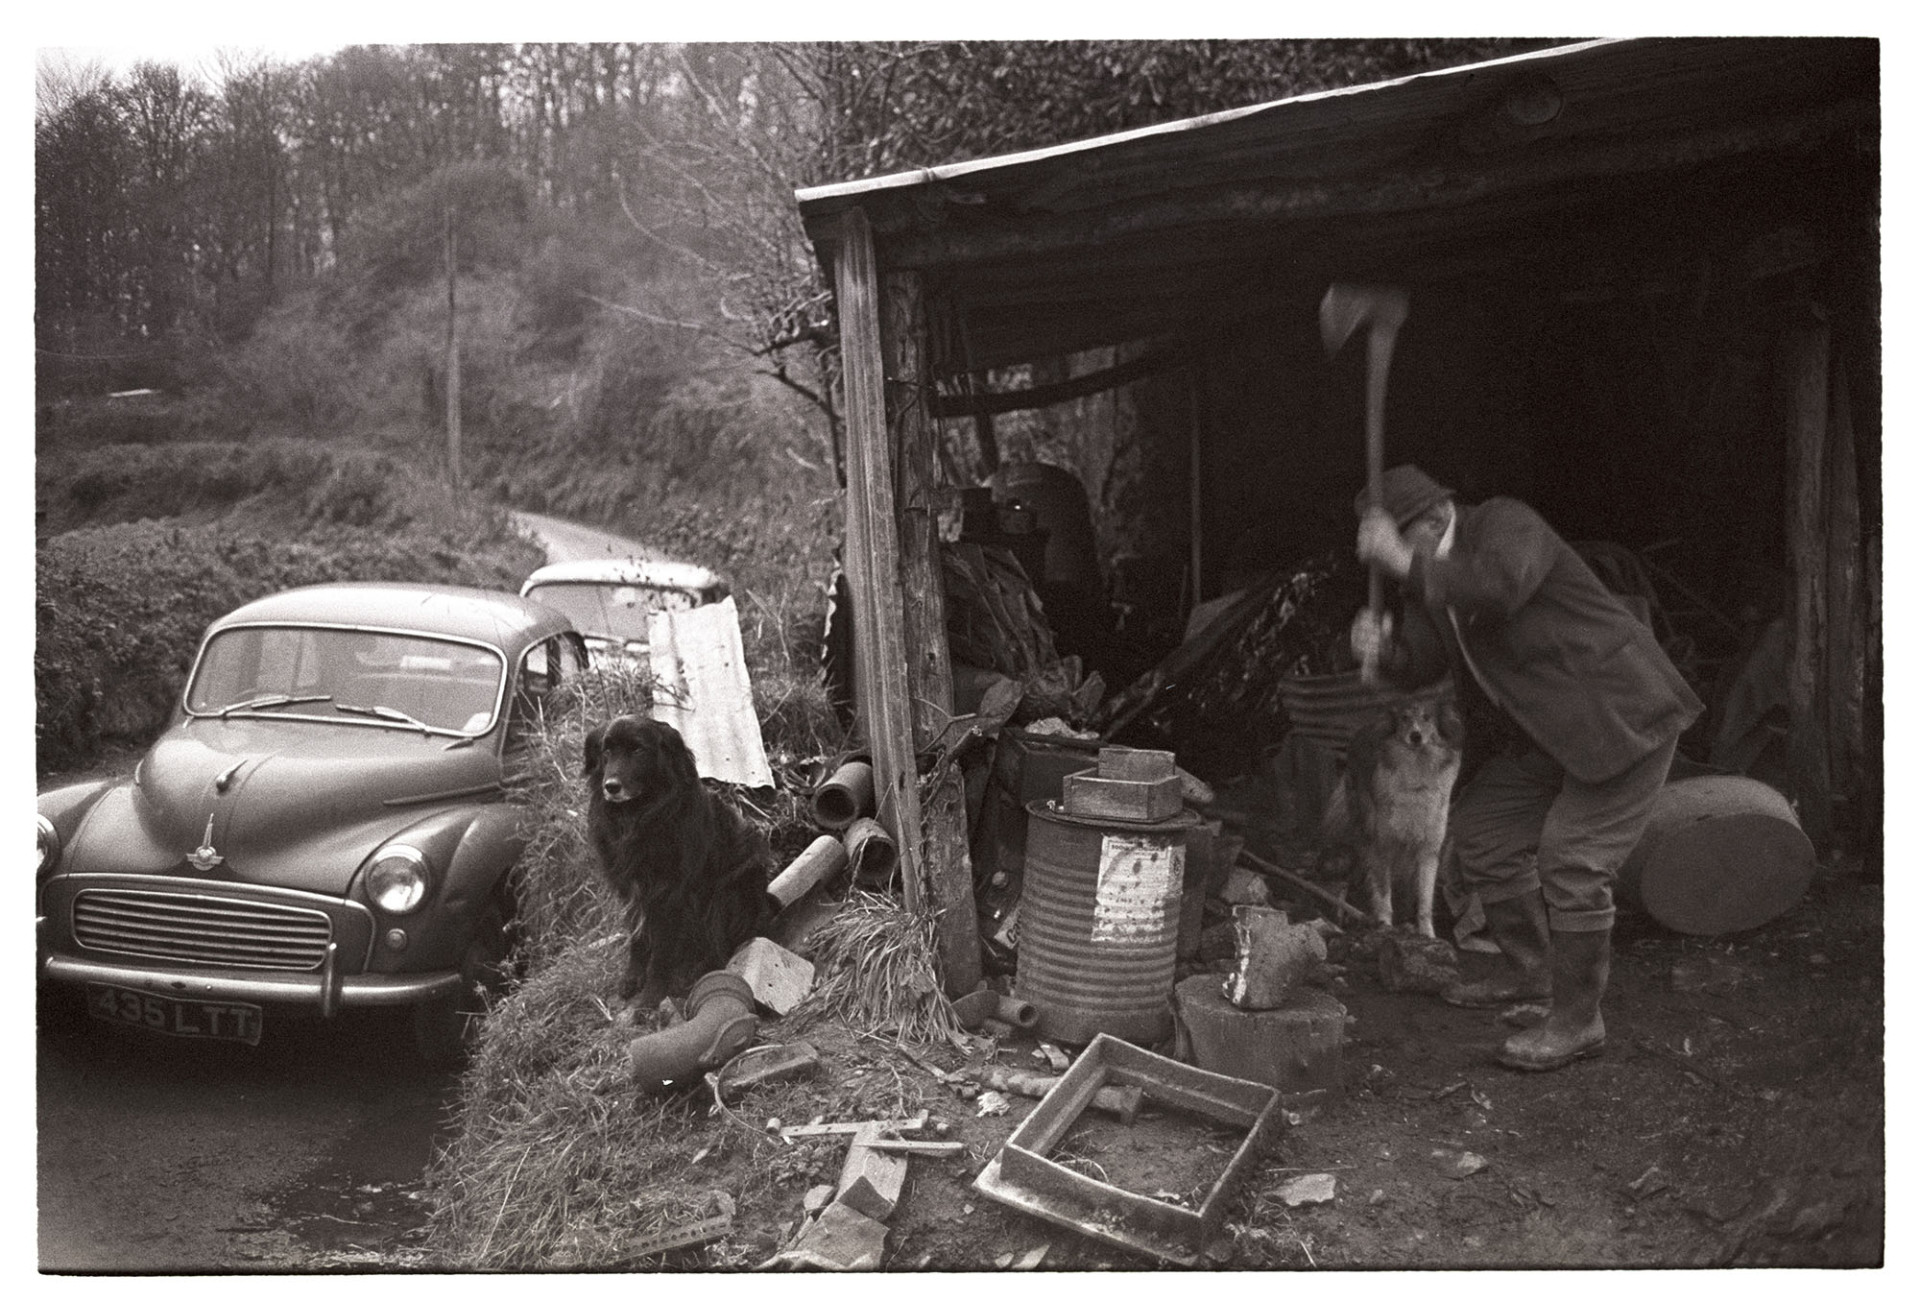 Farmer chopping logs, shed with car and dog.
[Archie Parkhouse chopping logs at the entrance to a shed at Millhams, Dolton.  He is accompanied by his two dogs. A Morris Minor car is parked in the lane by the shed.]